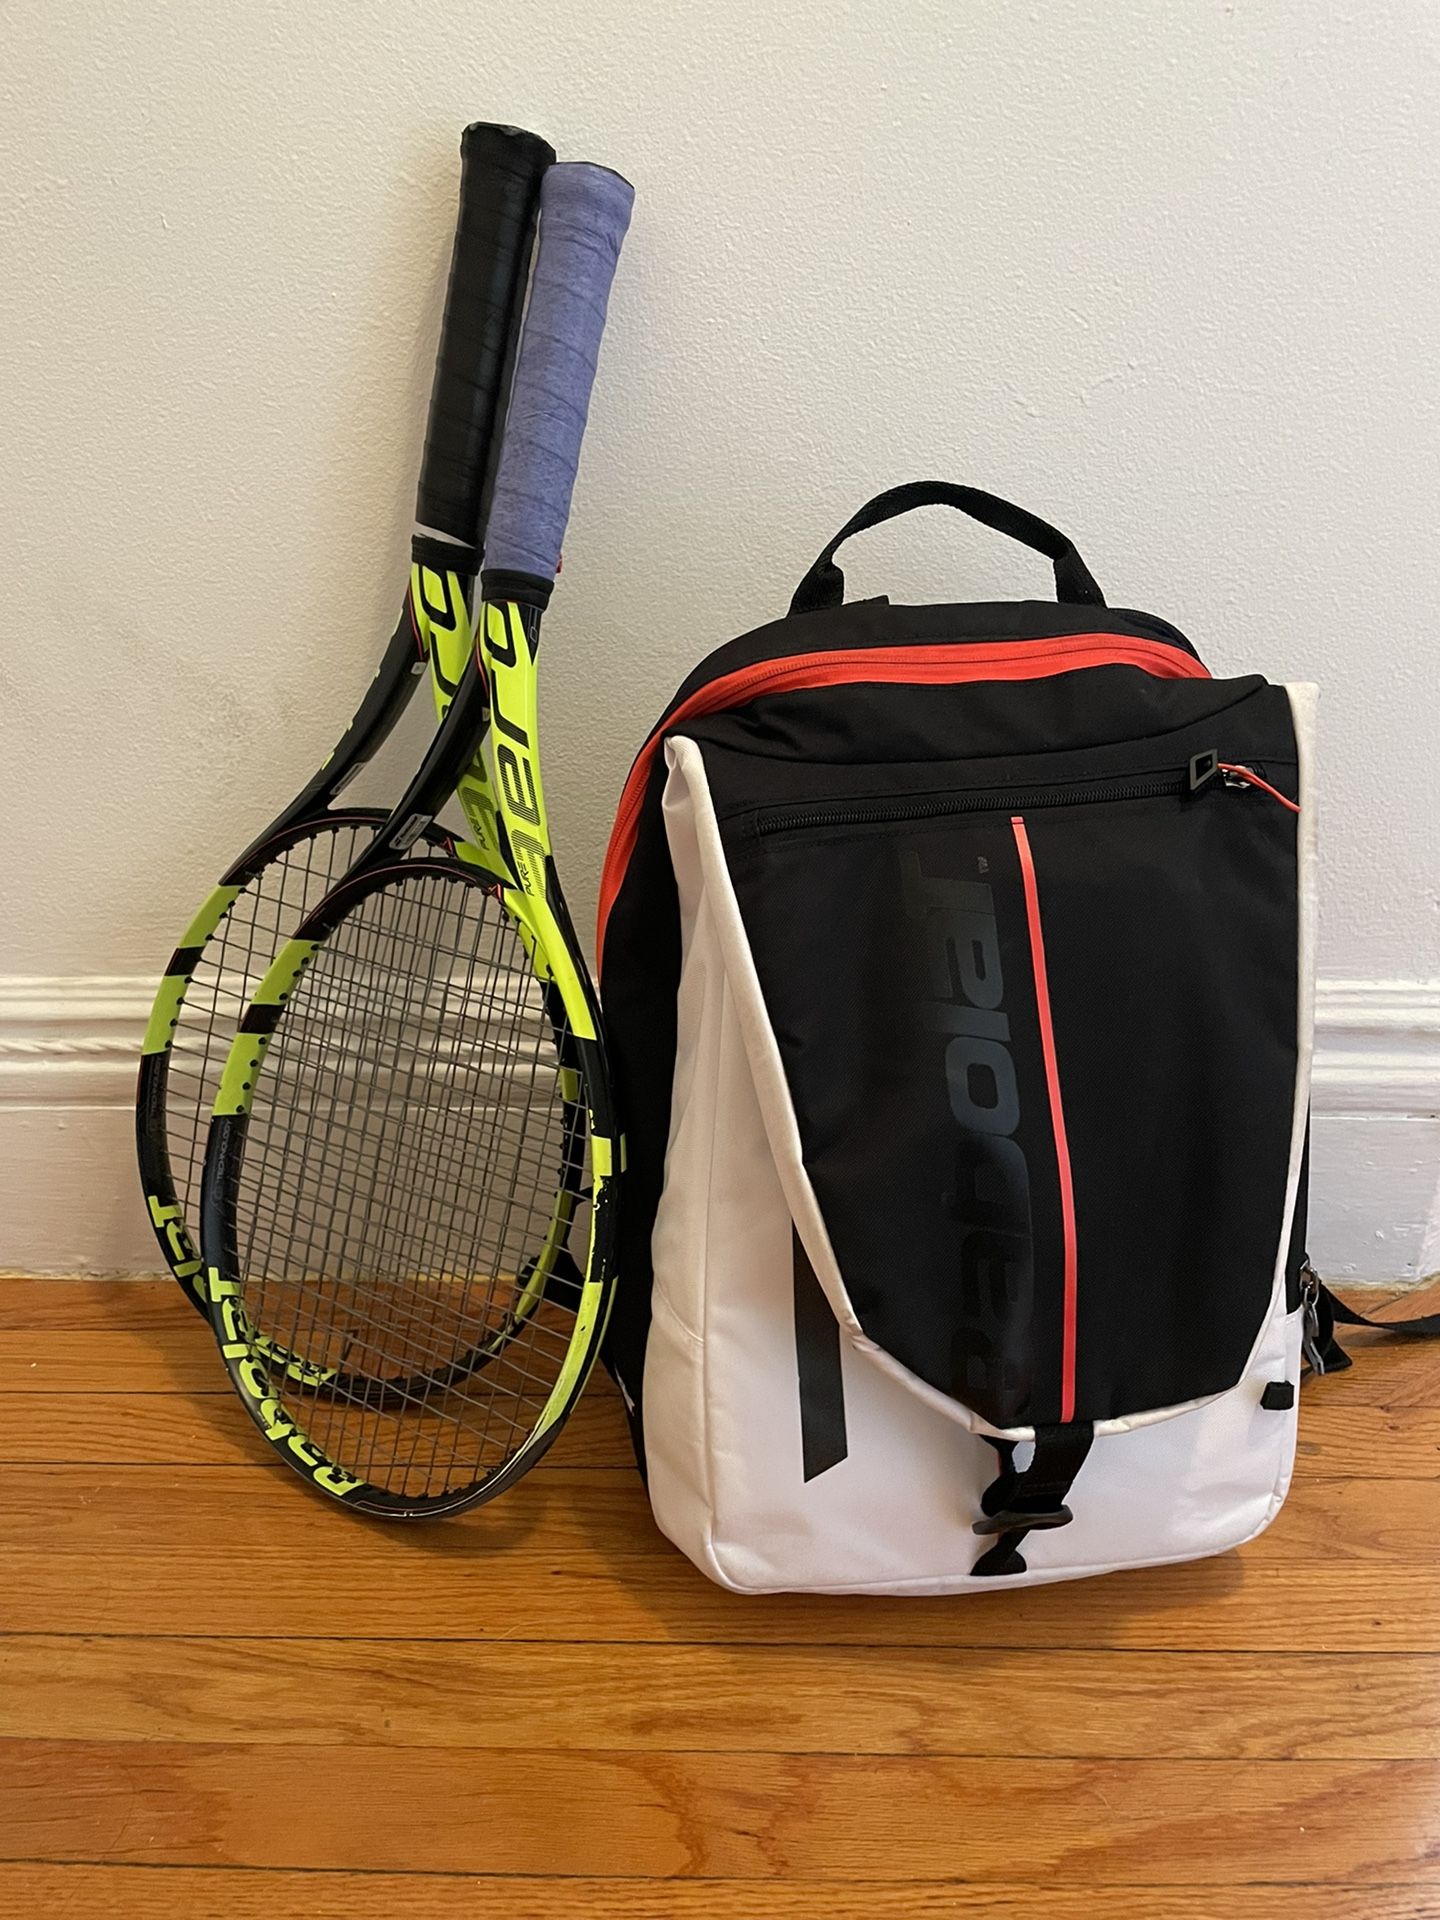 Two Babolat Pure Aero Tour 2016 Tennis Rackets w/ Babolat Pure Strike Backpack